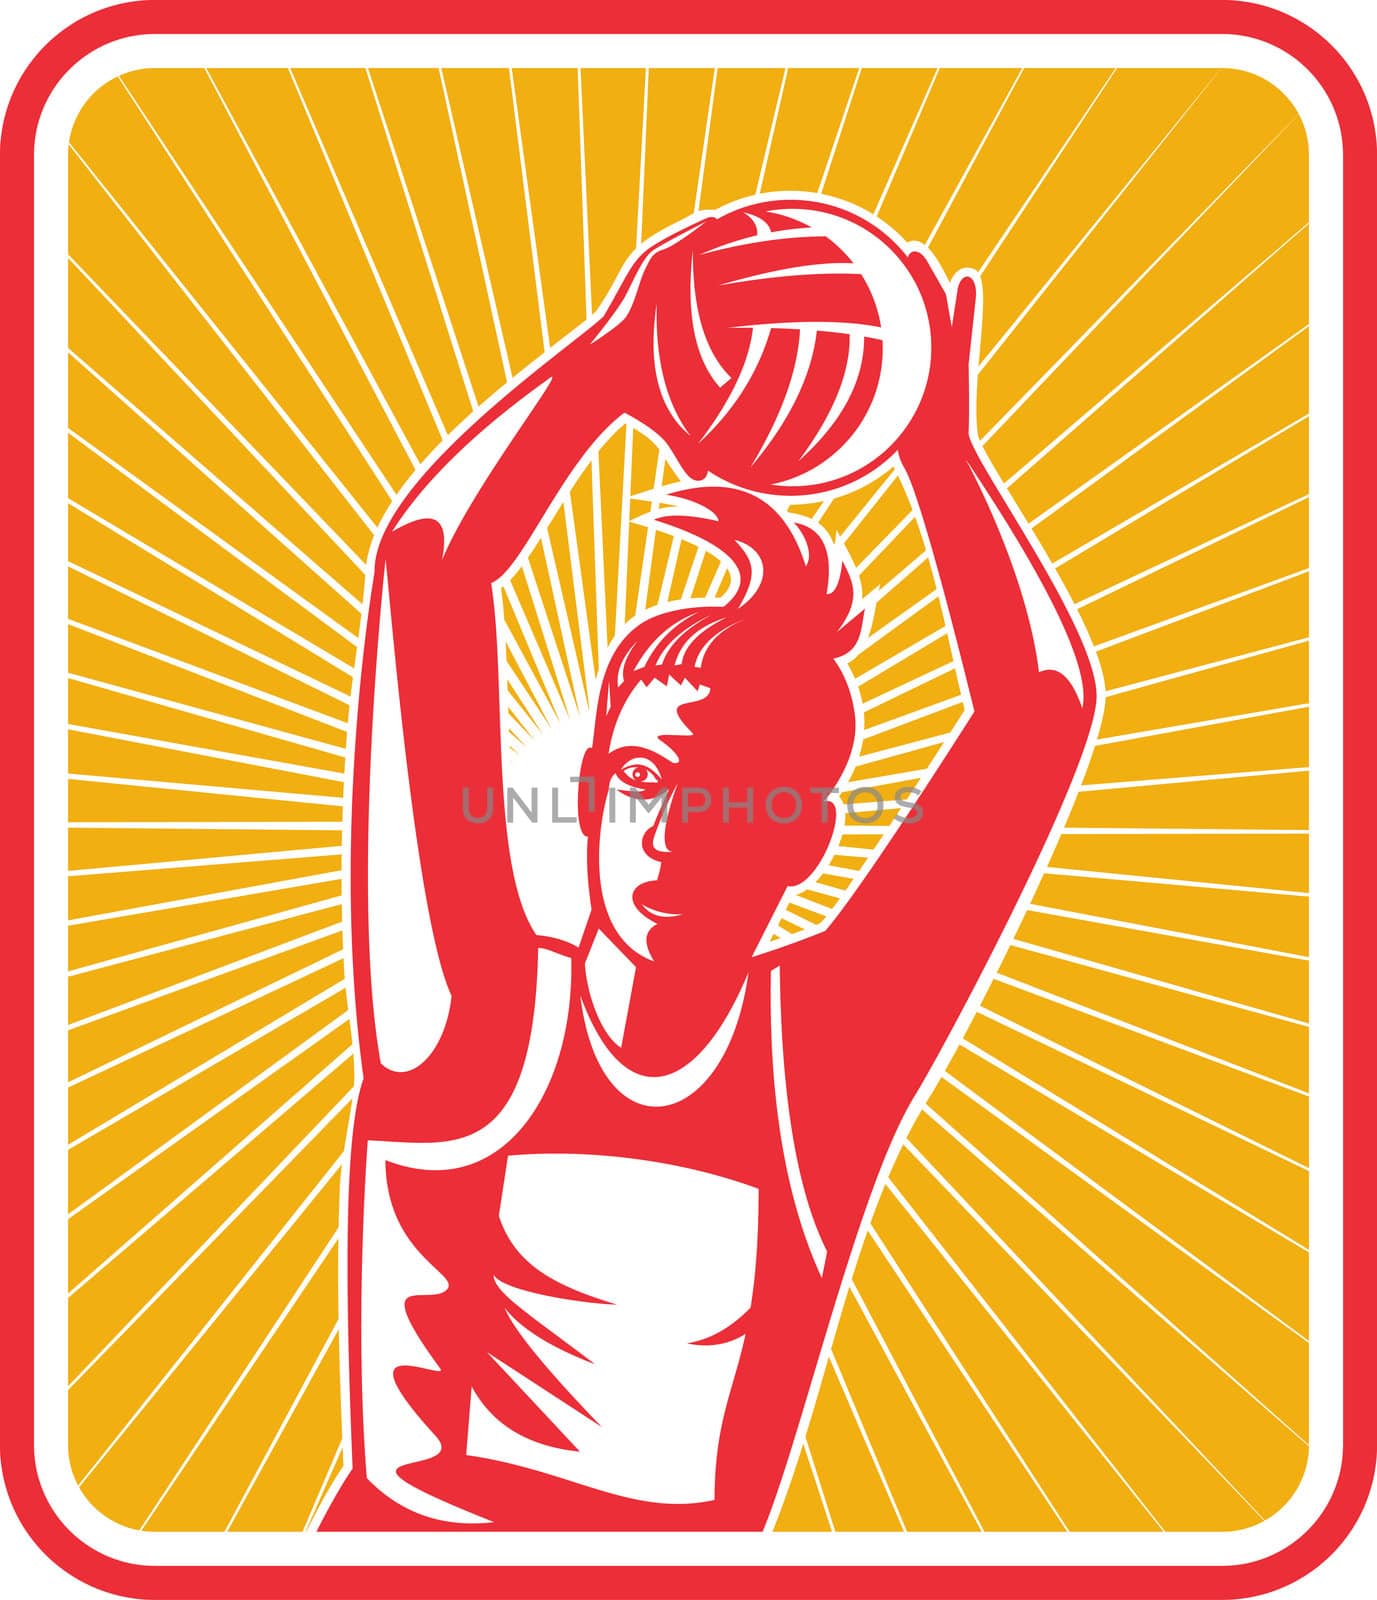  illustration of a netball player ready to pass ball with shield or triangle in the background